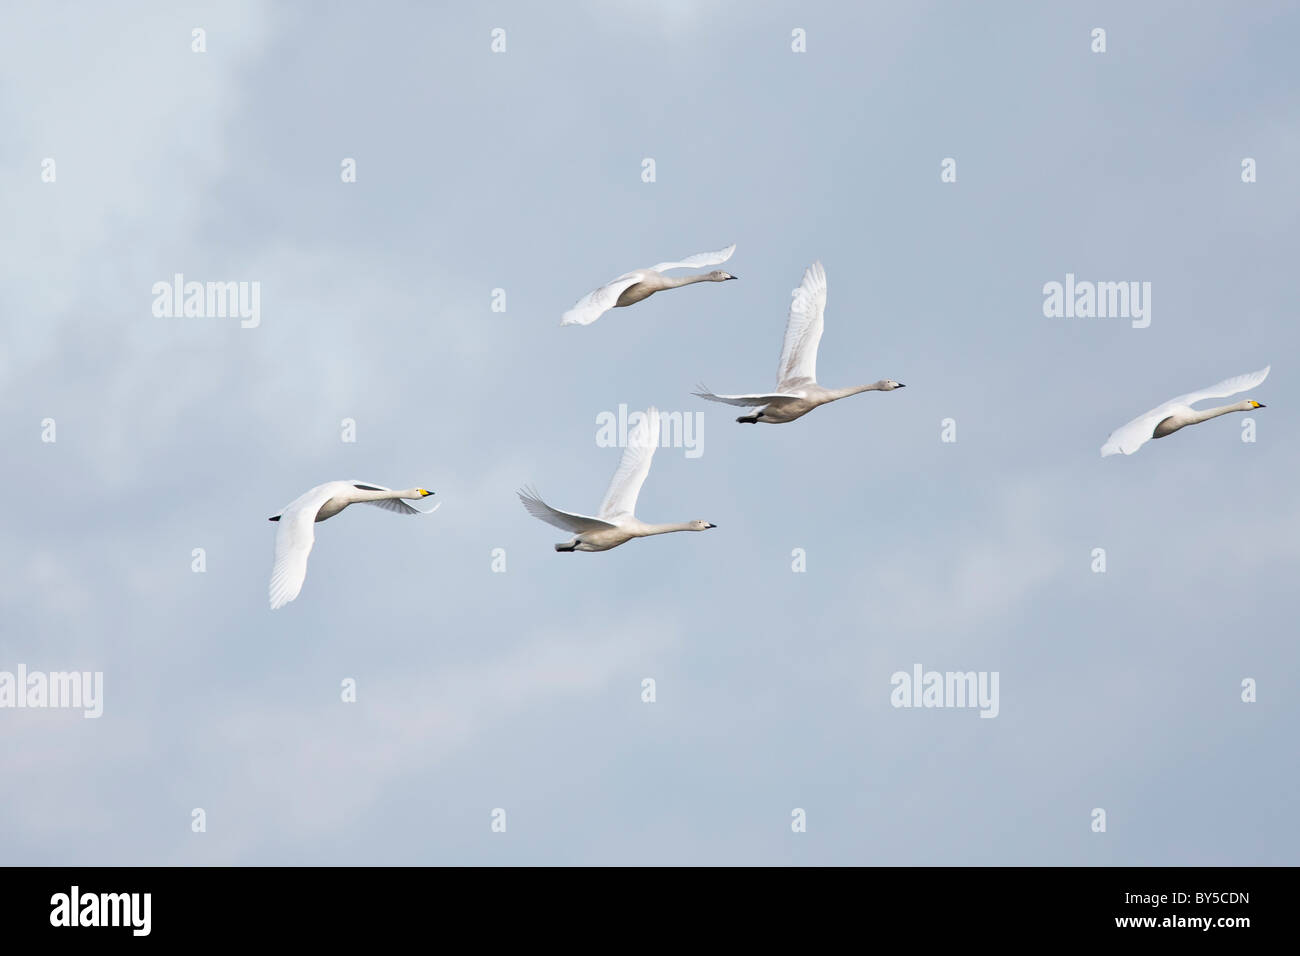 Family of whooper swans in flight against a cloudy blue sky Stock Photo